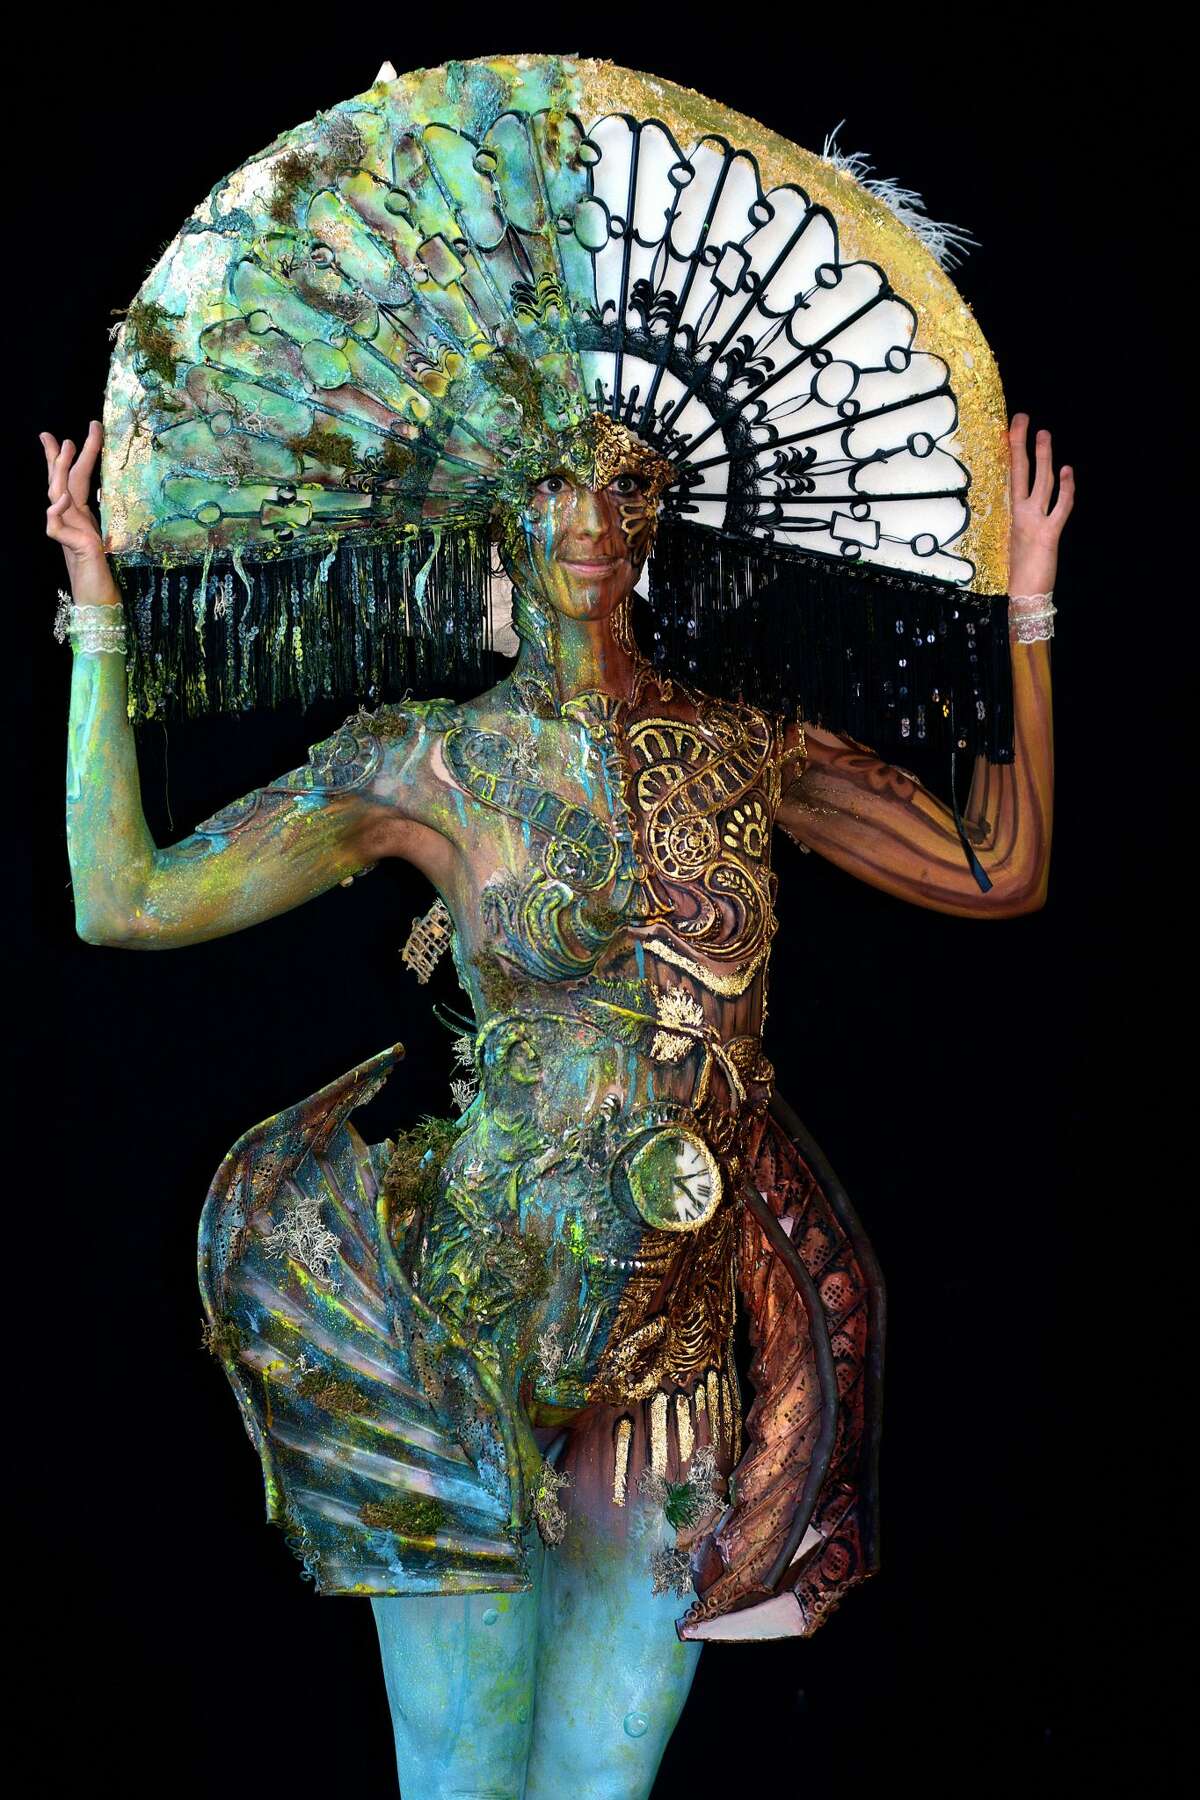 PHOTOS World Bodypainting Festival gets creative, naked in Austria